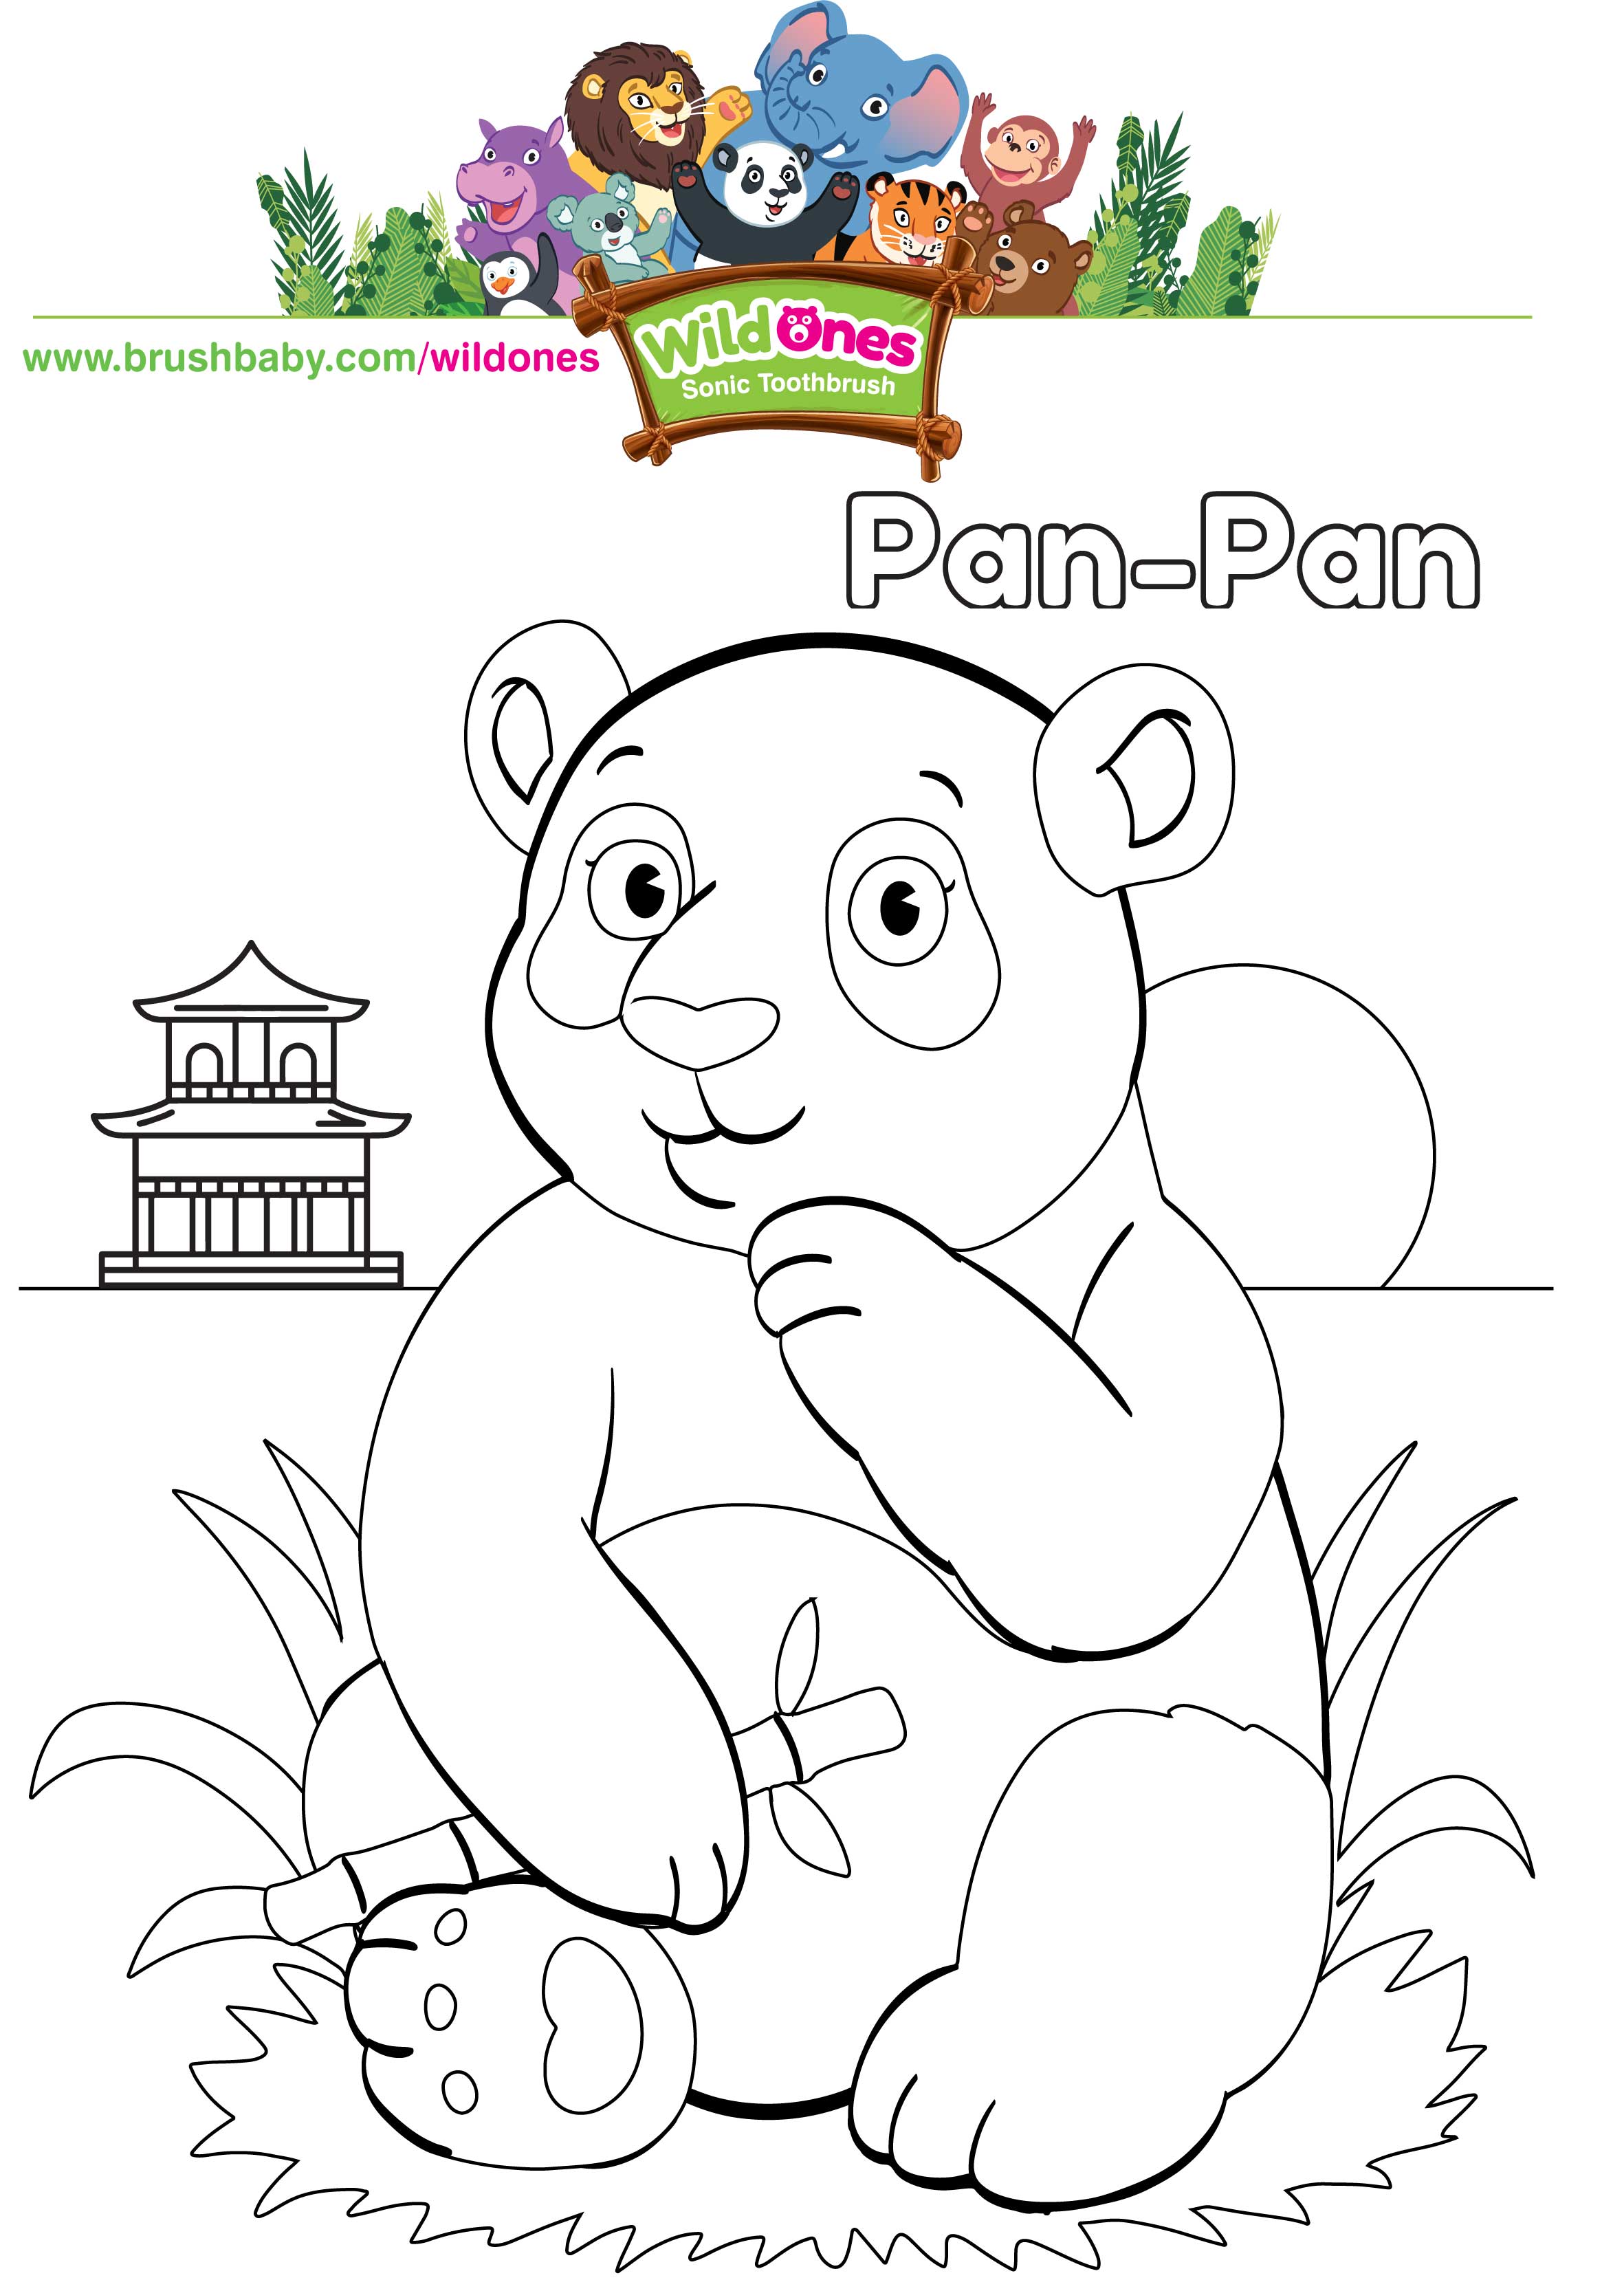 WildOnes Kids Electric Rechargeable Toothbrush Panda Childrens Colouring Downloadable Activity Sheet